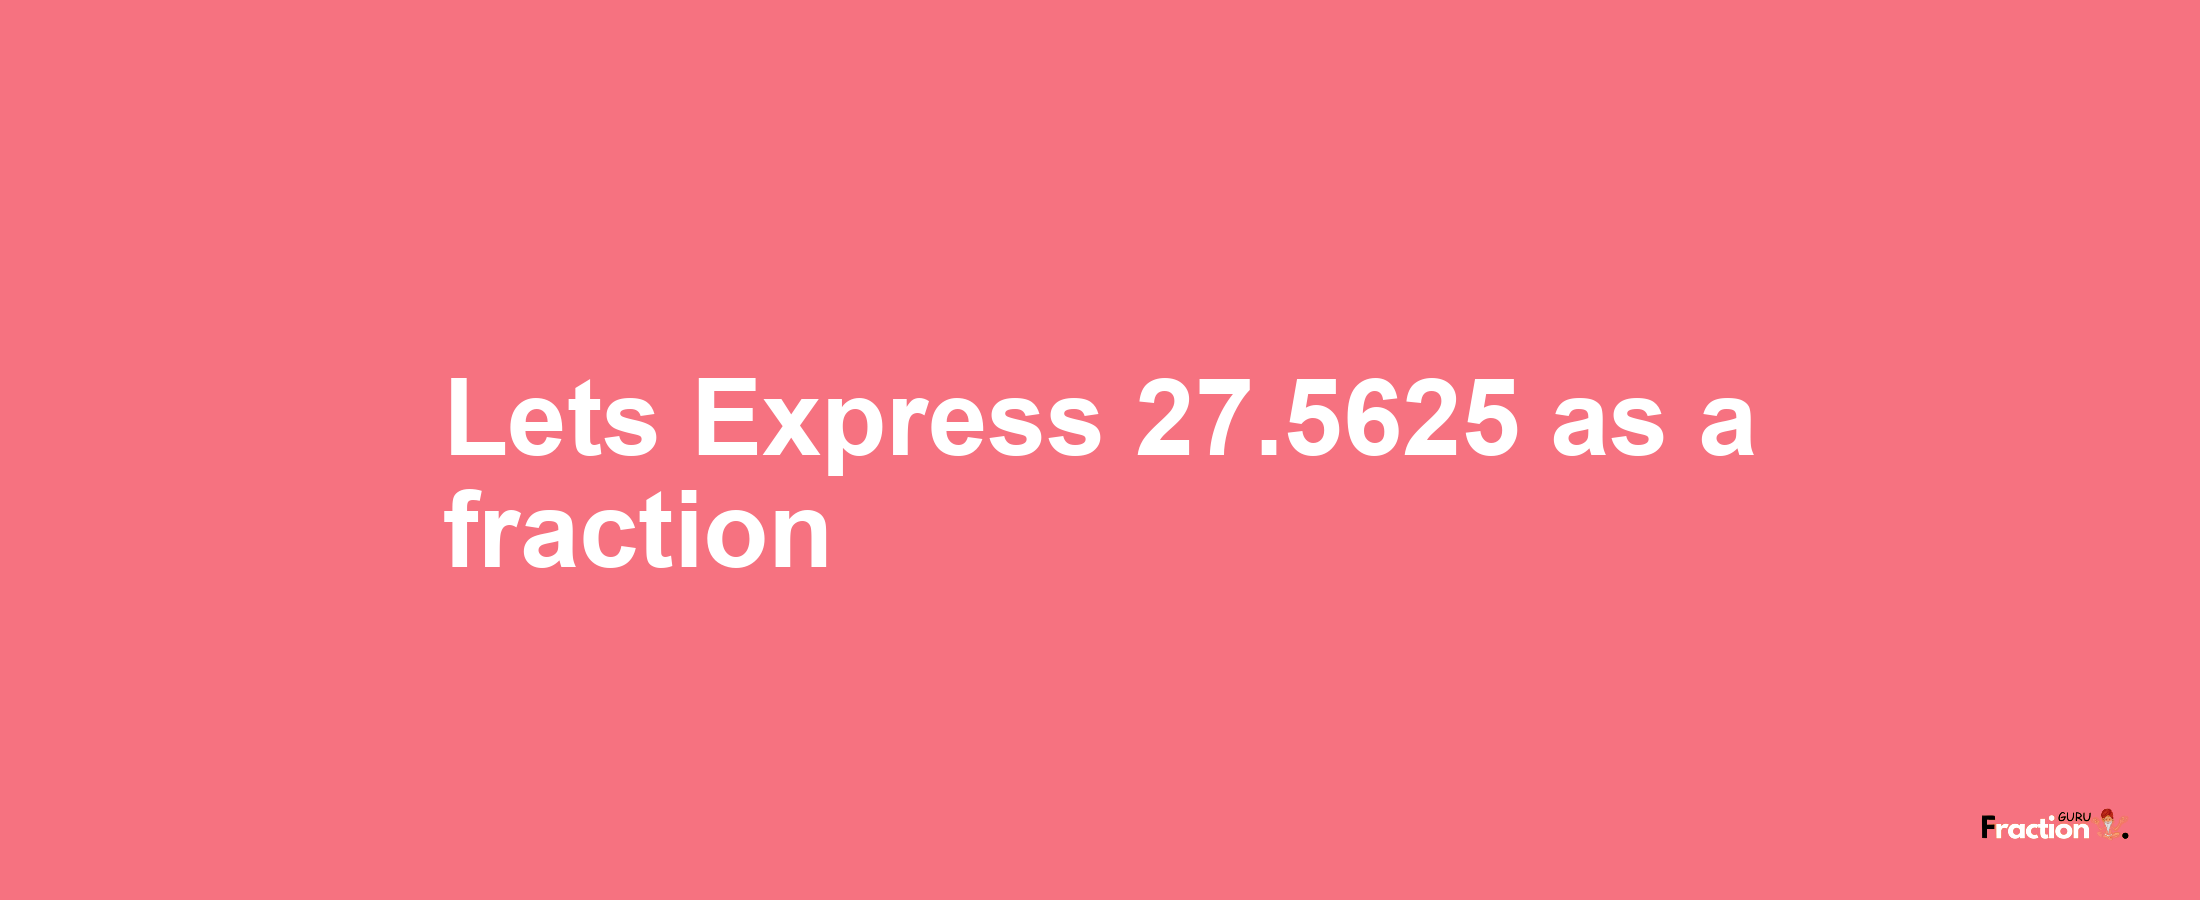 Lets Express 27.5625 as afraction